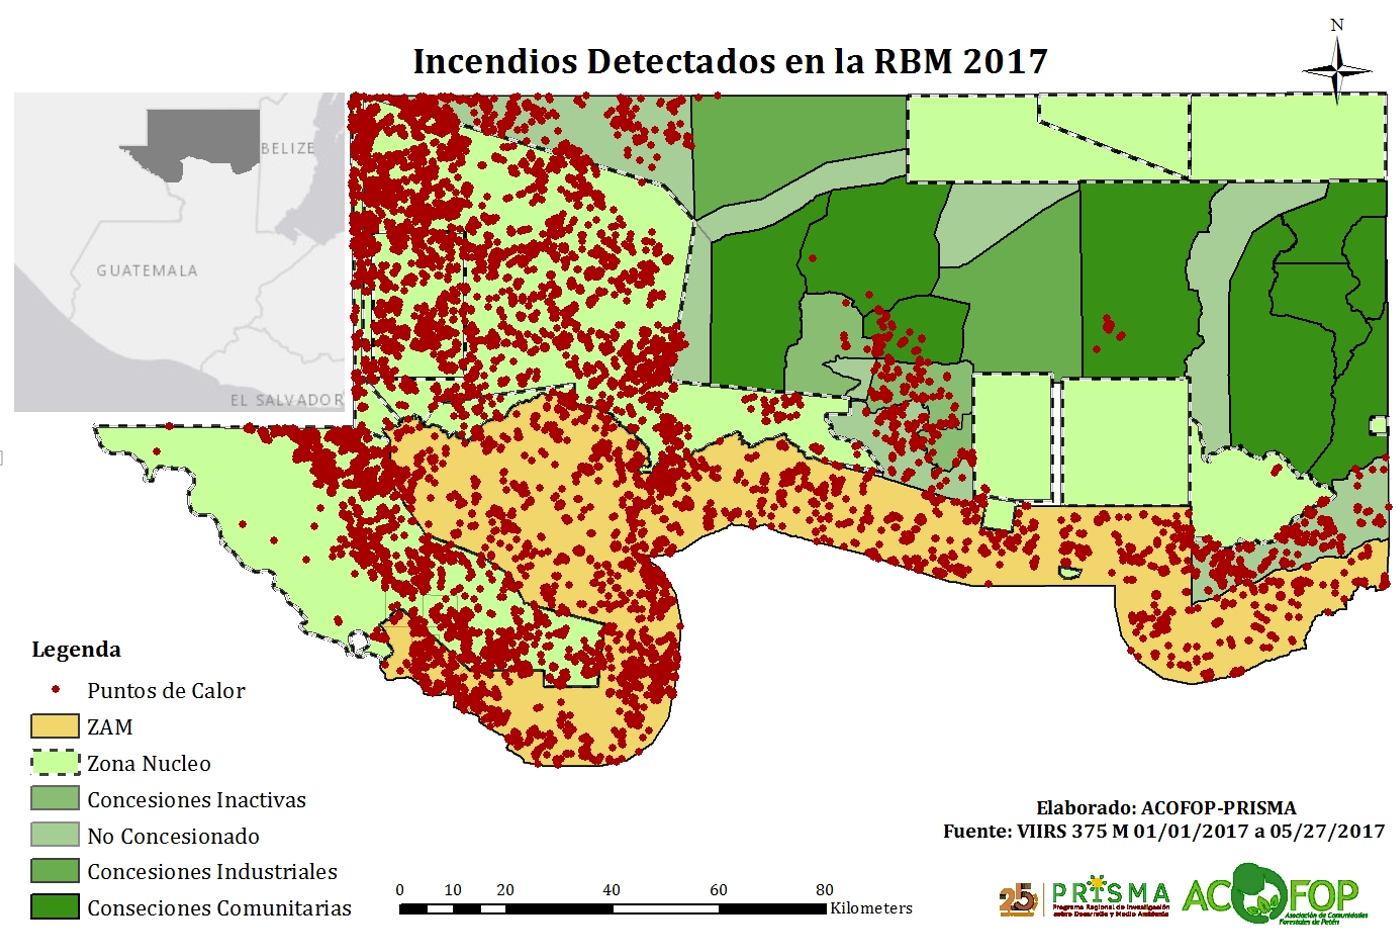 Graph that shows fires detected in MBR in 2017, where red areas are hot spots.